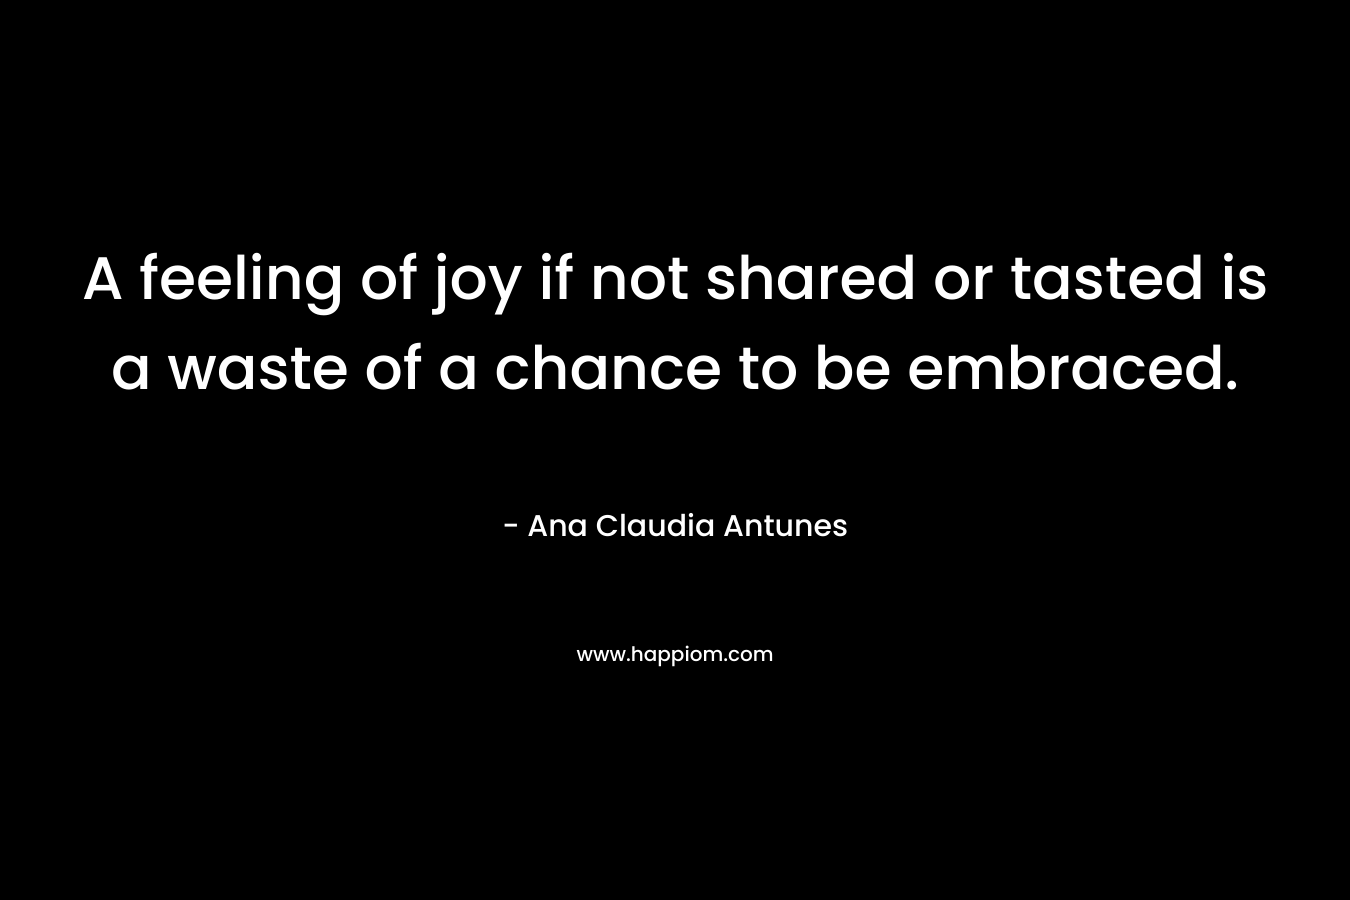 A feeling of joy if not shared or tasted is a waste of a chance to be embraced.